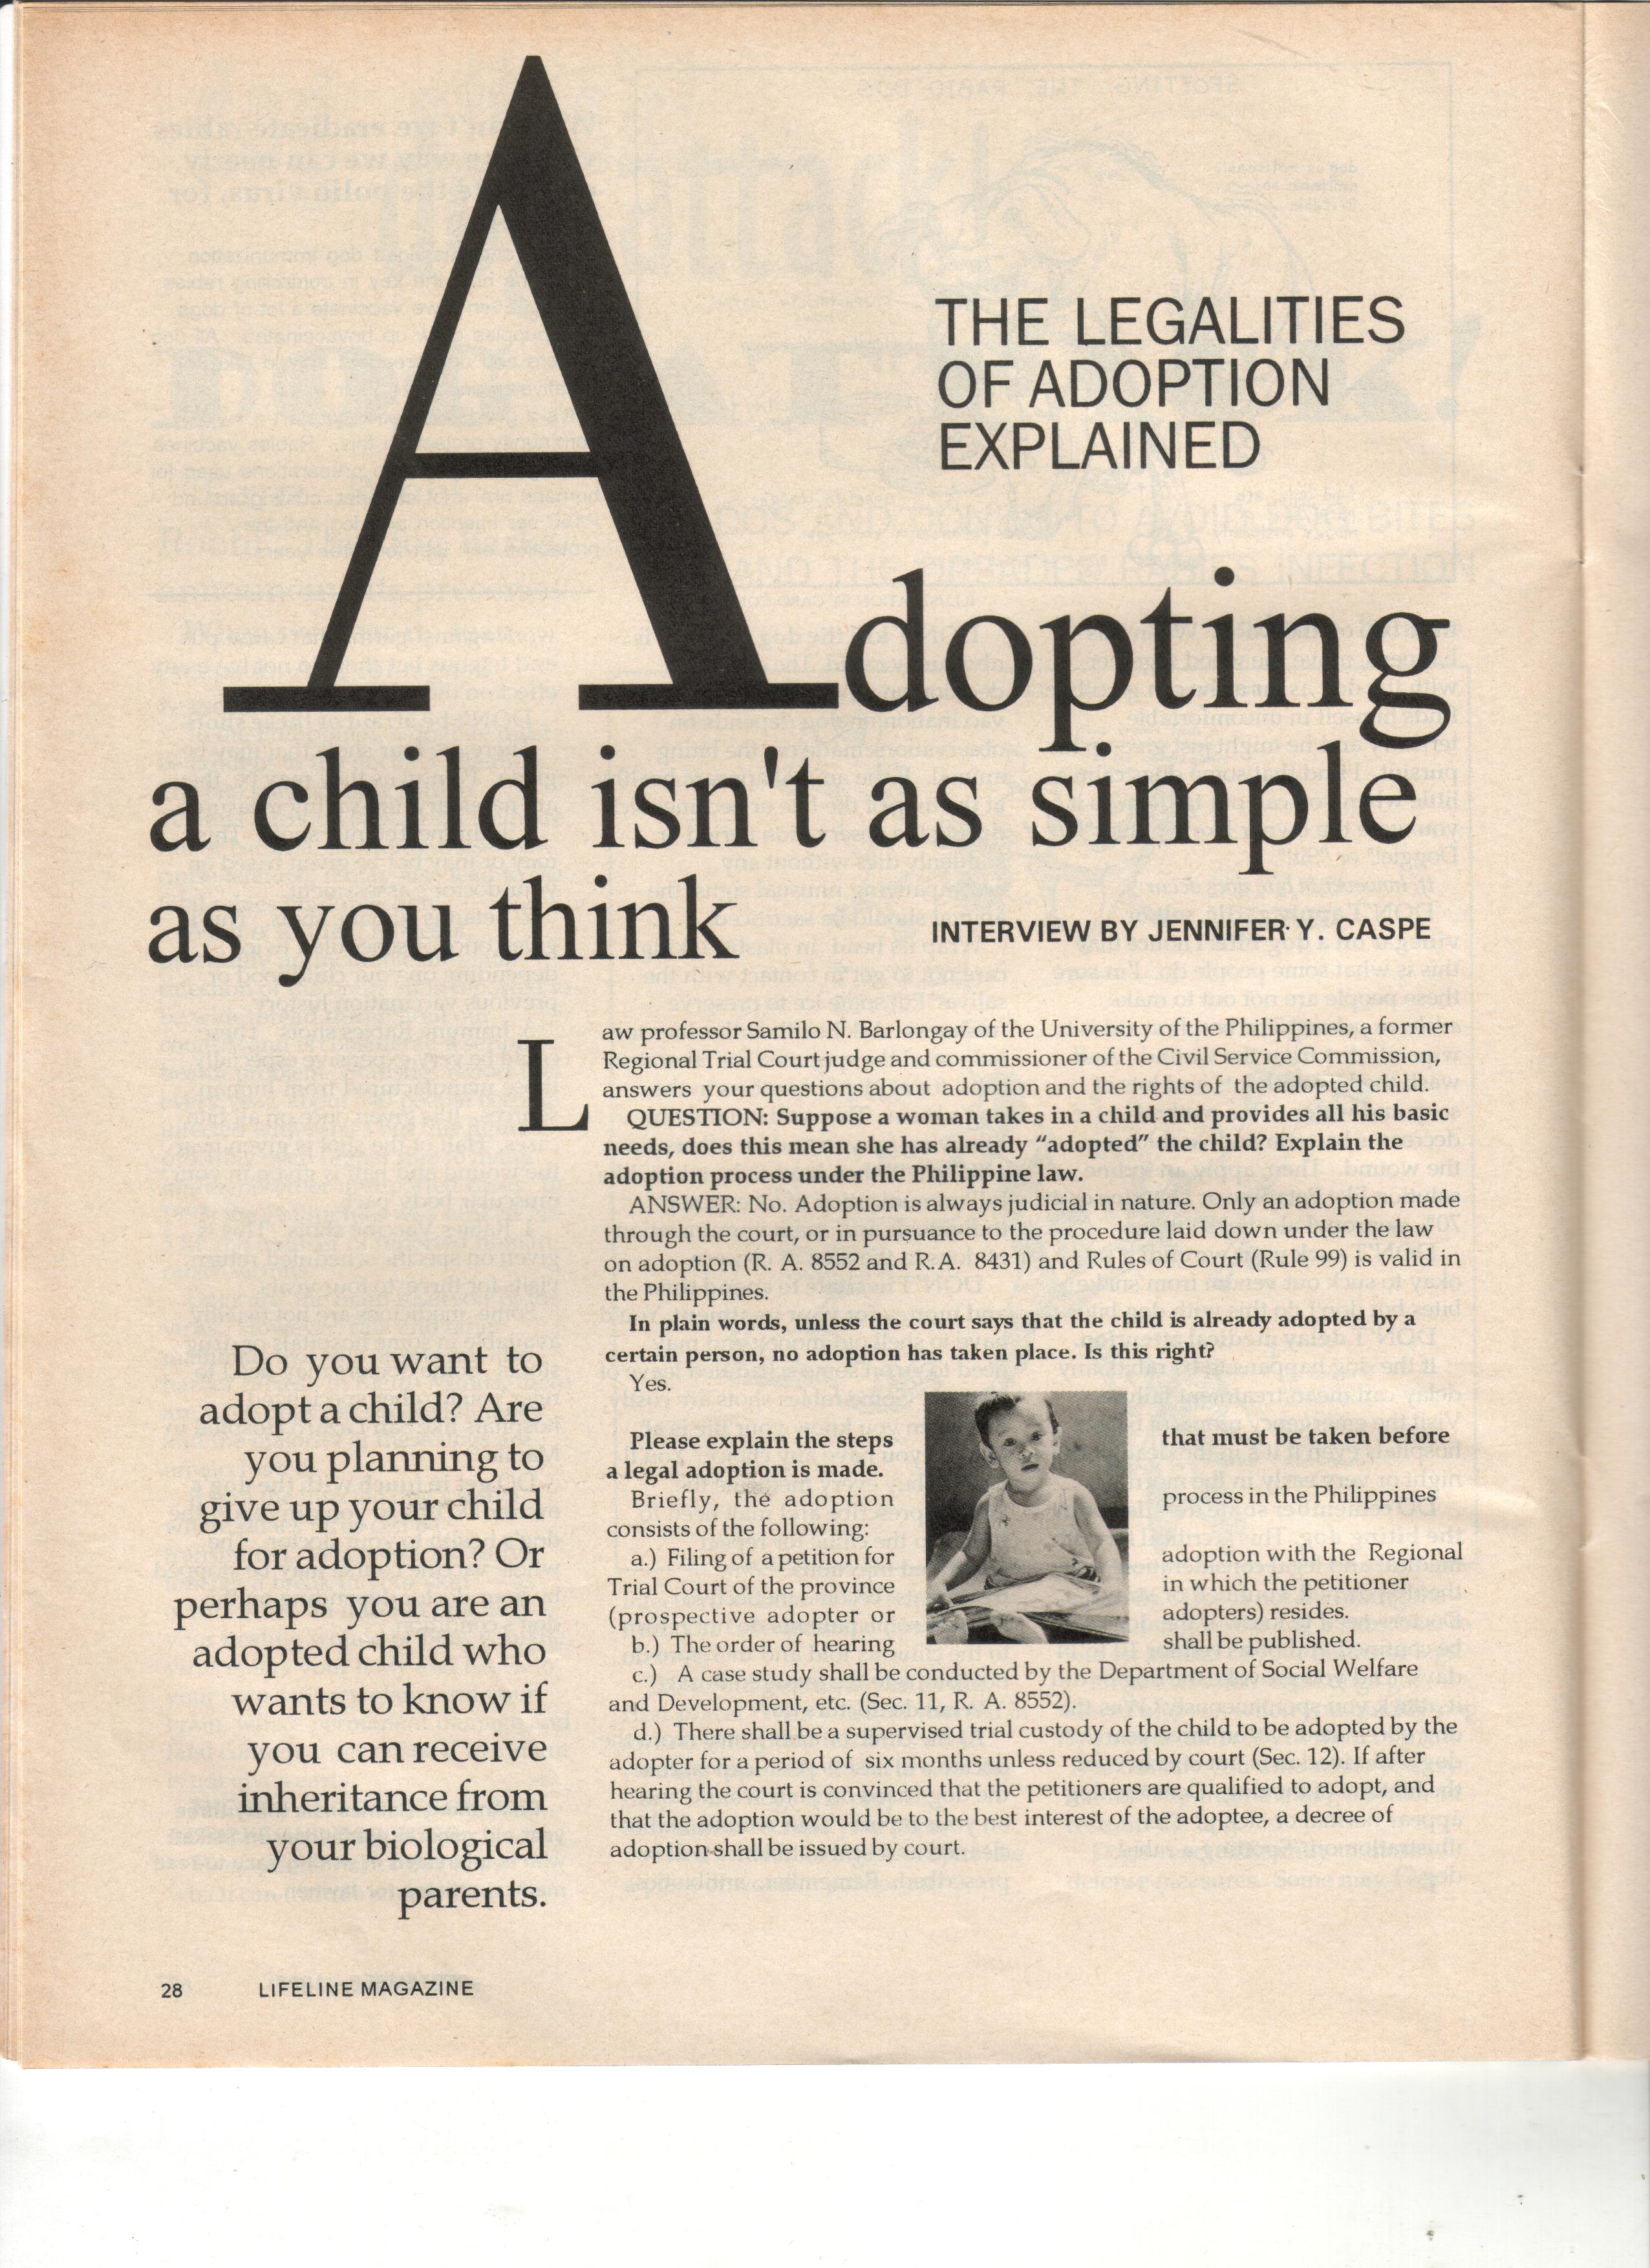 09-98 The Legalities of Adoption 1